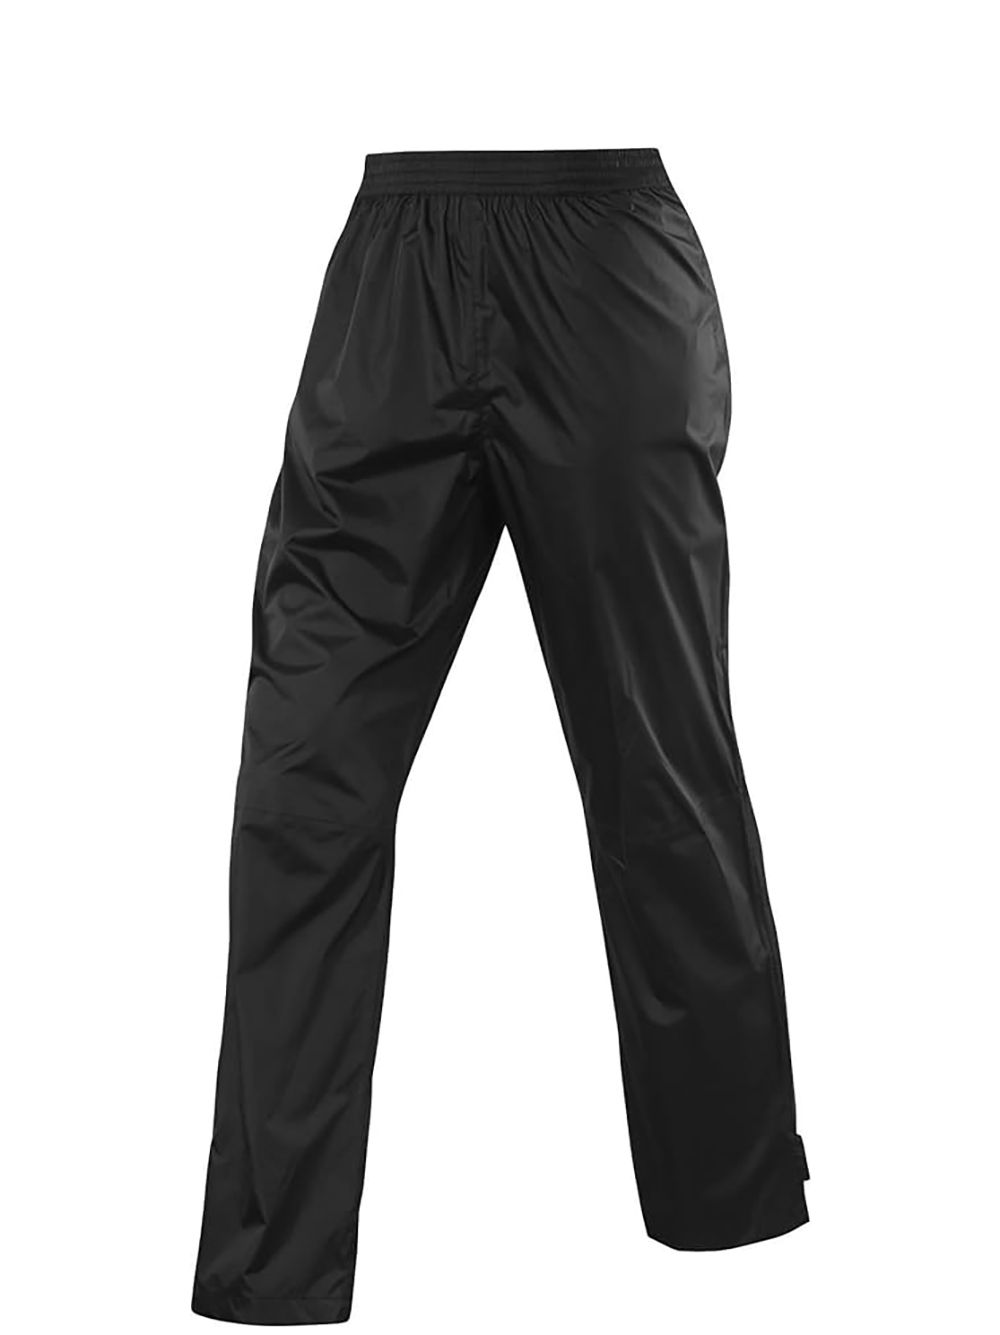 Best waterproof MTB pants 2023 – riding trousers to keep the dirt and ...